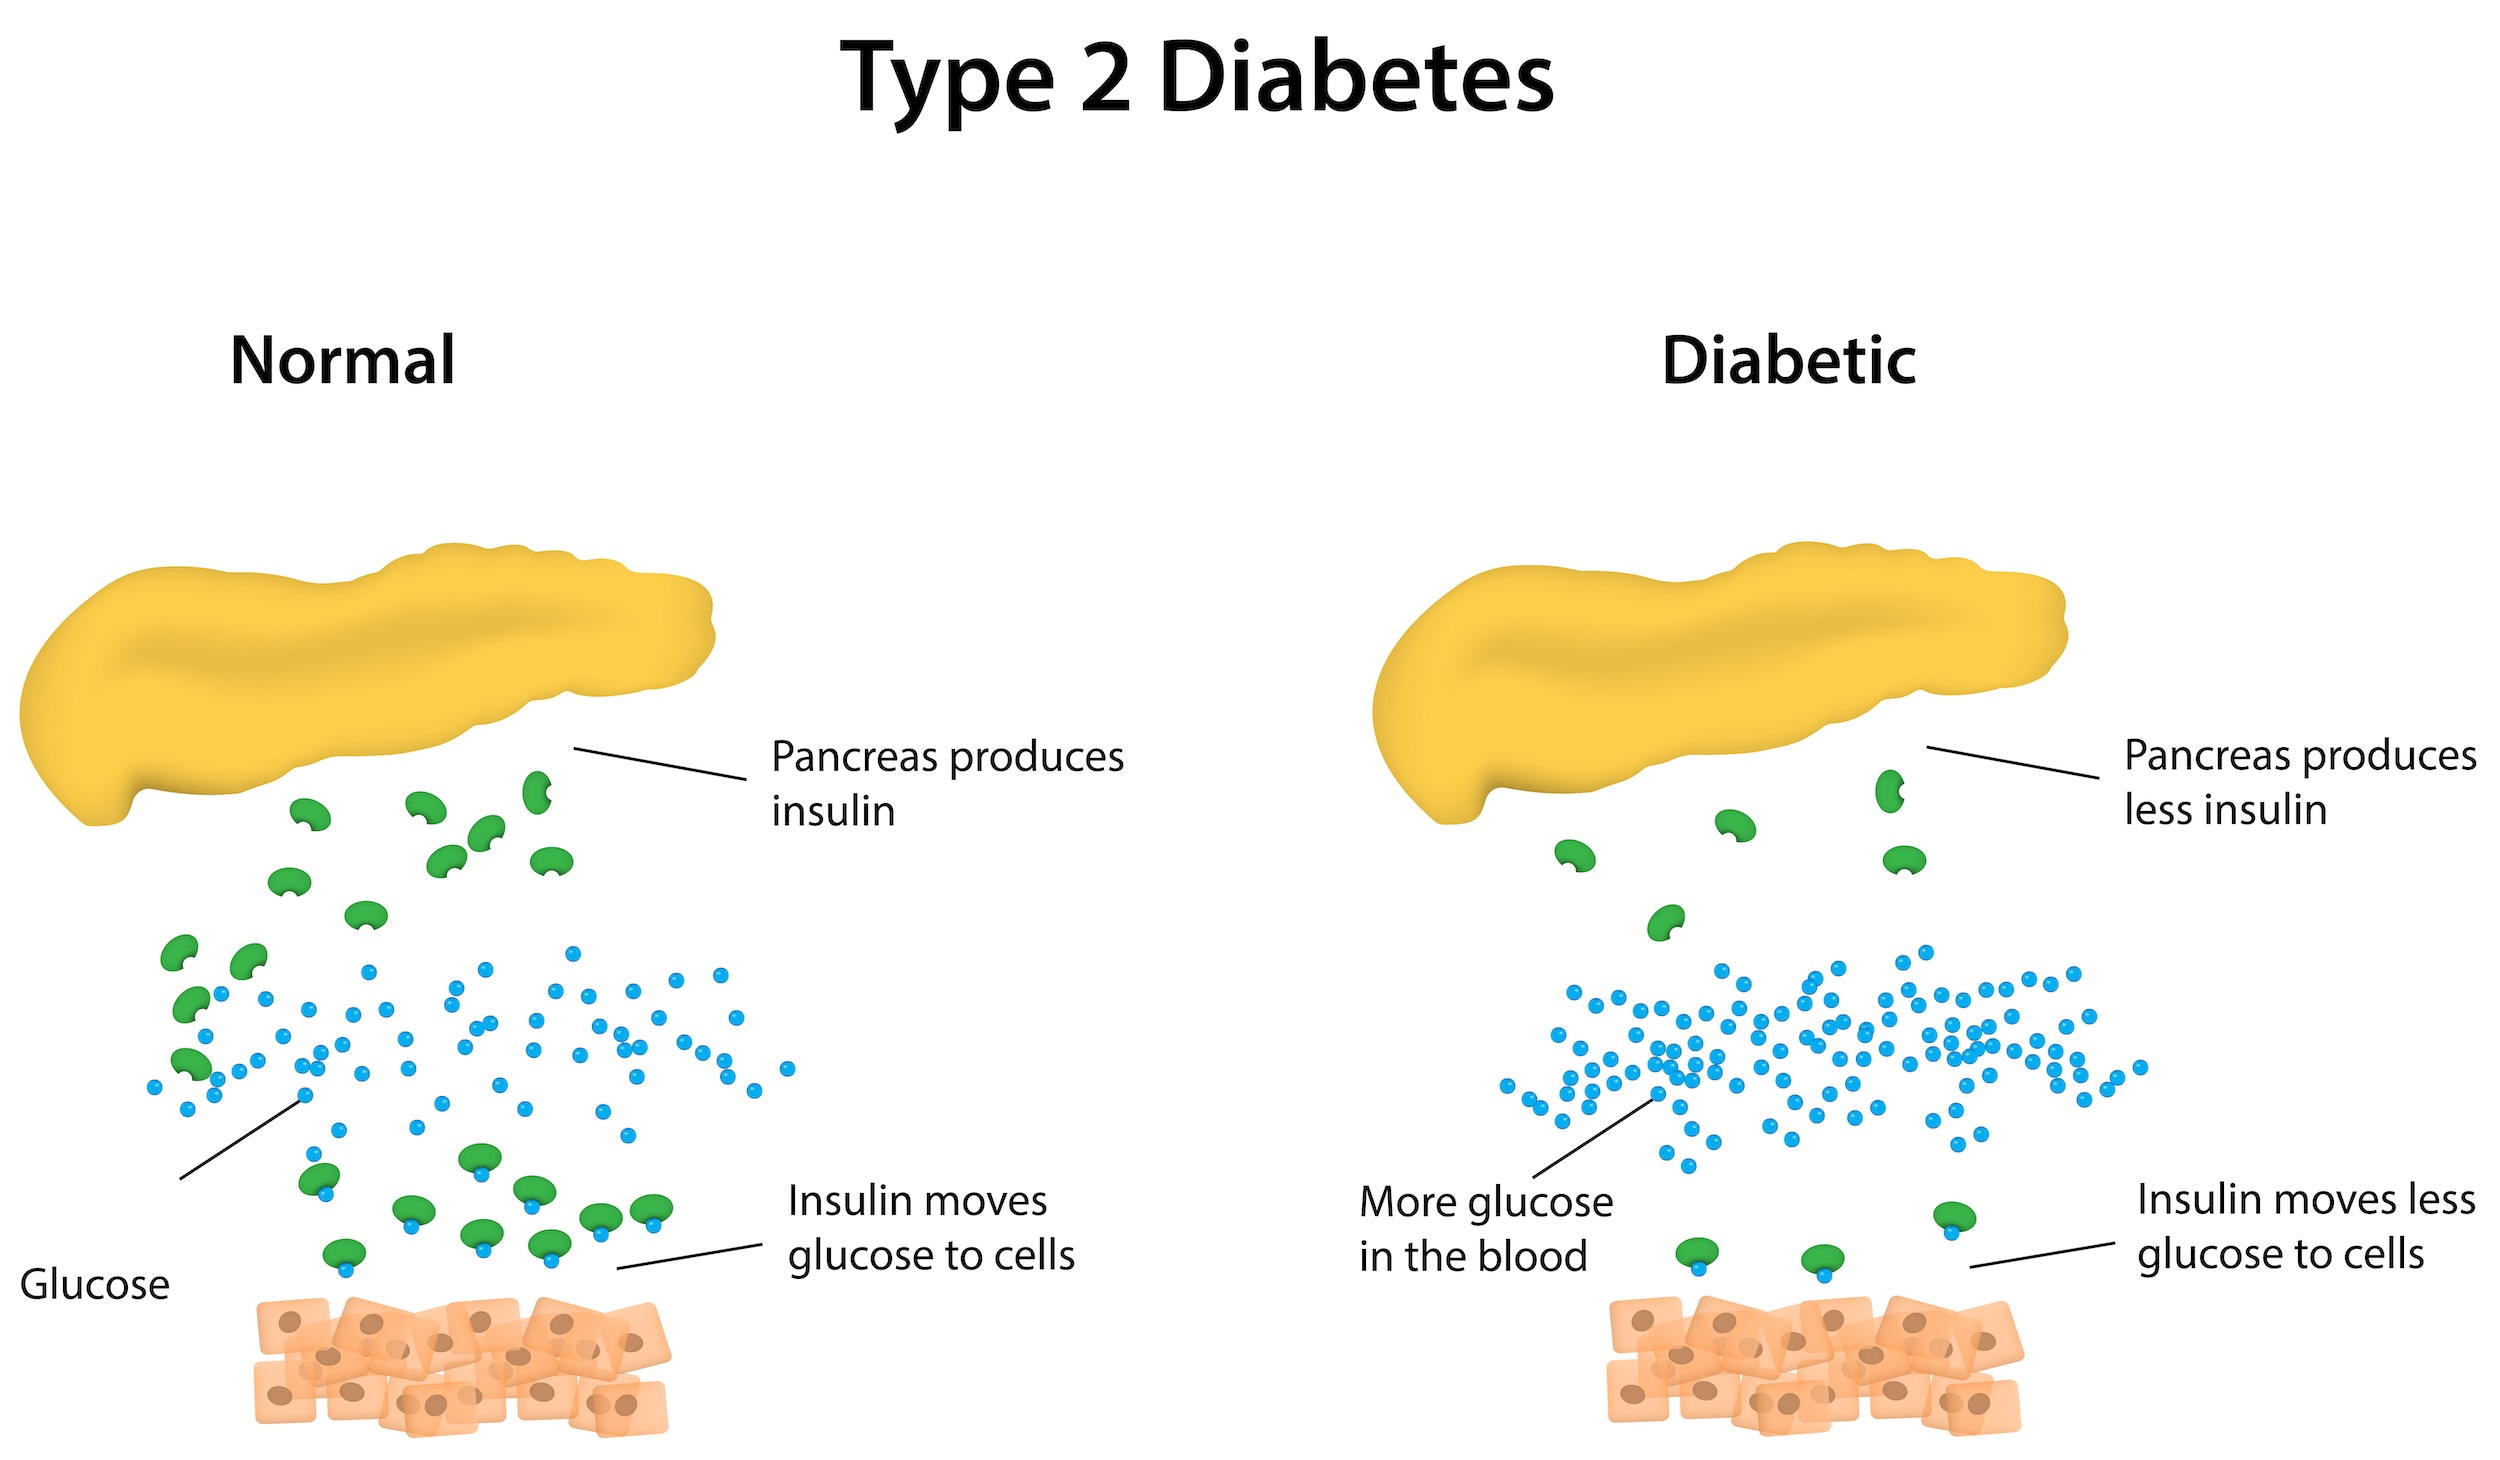 in type 2 diabetes, the pancreas produces less insulin which results in less glucose moving from the blood stream into the cells